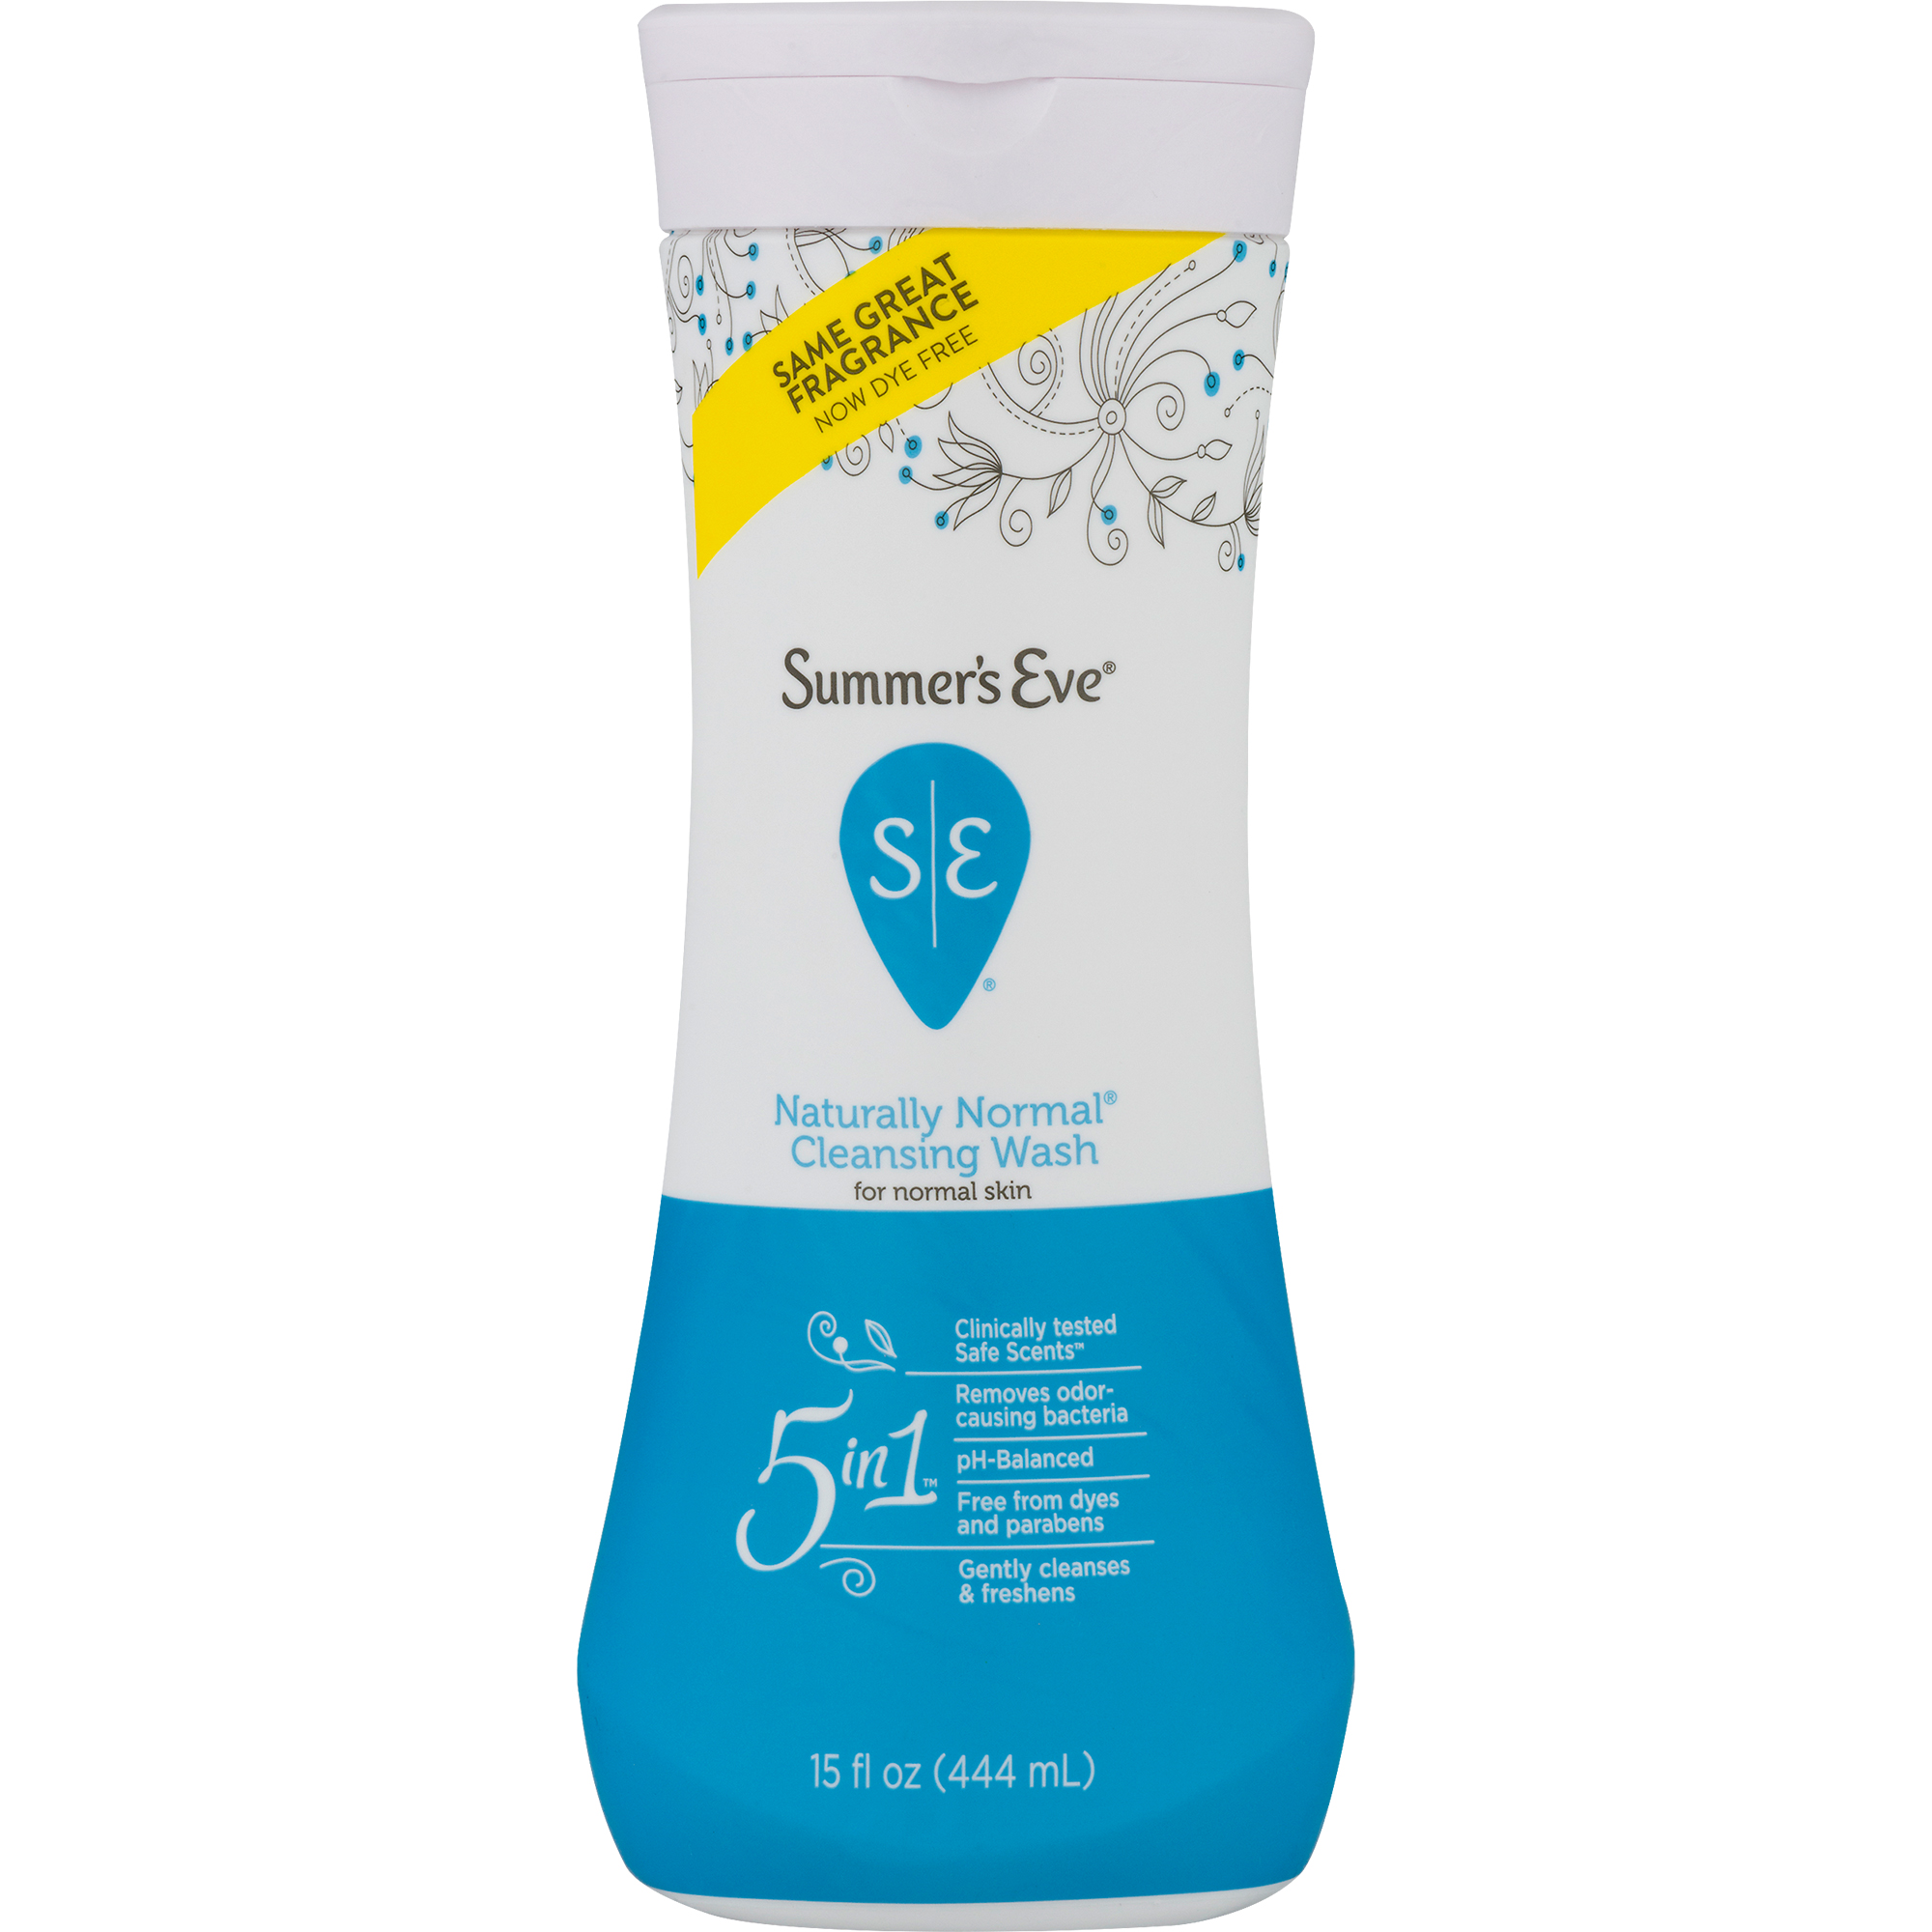 Summer's Eve, Cleansing Wash, Naturally Normal, 12 Oz - image 1 of 8